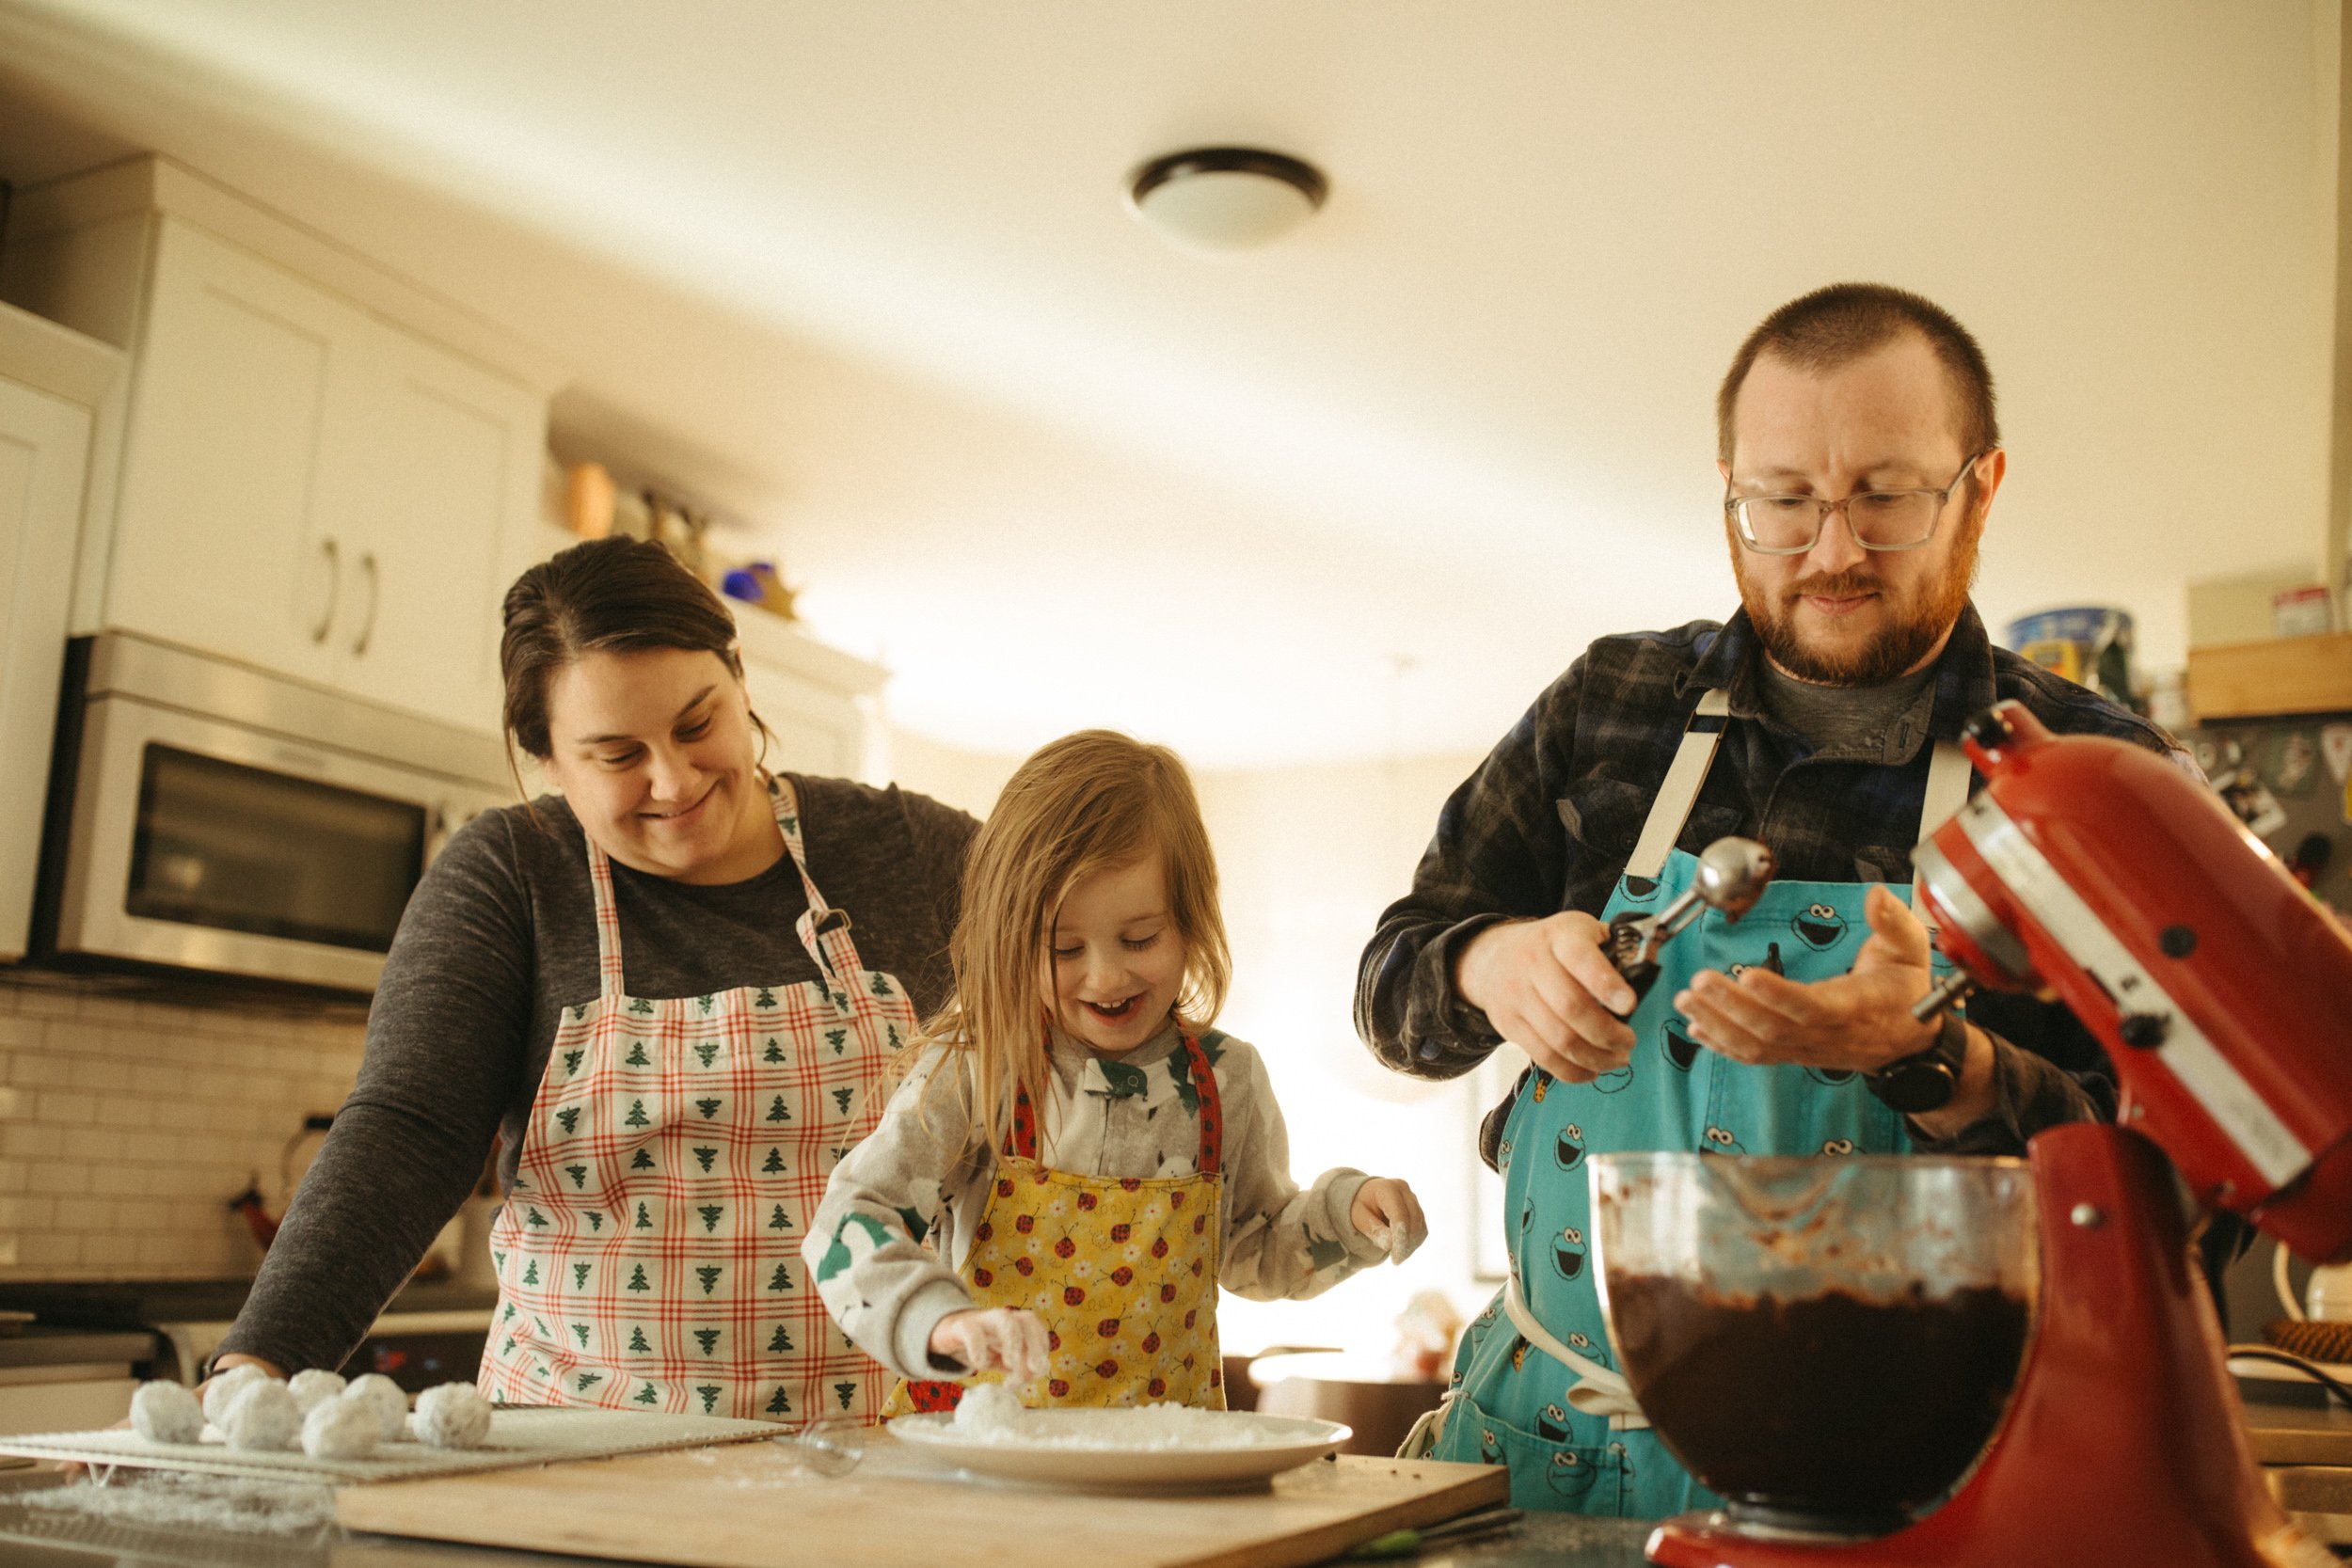 in home session northwest indiana nwi michigan city family documentary film lifestyle photographer baking Christmas cookies -6.jpg